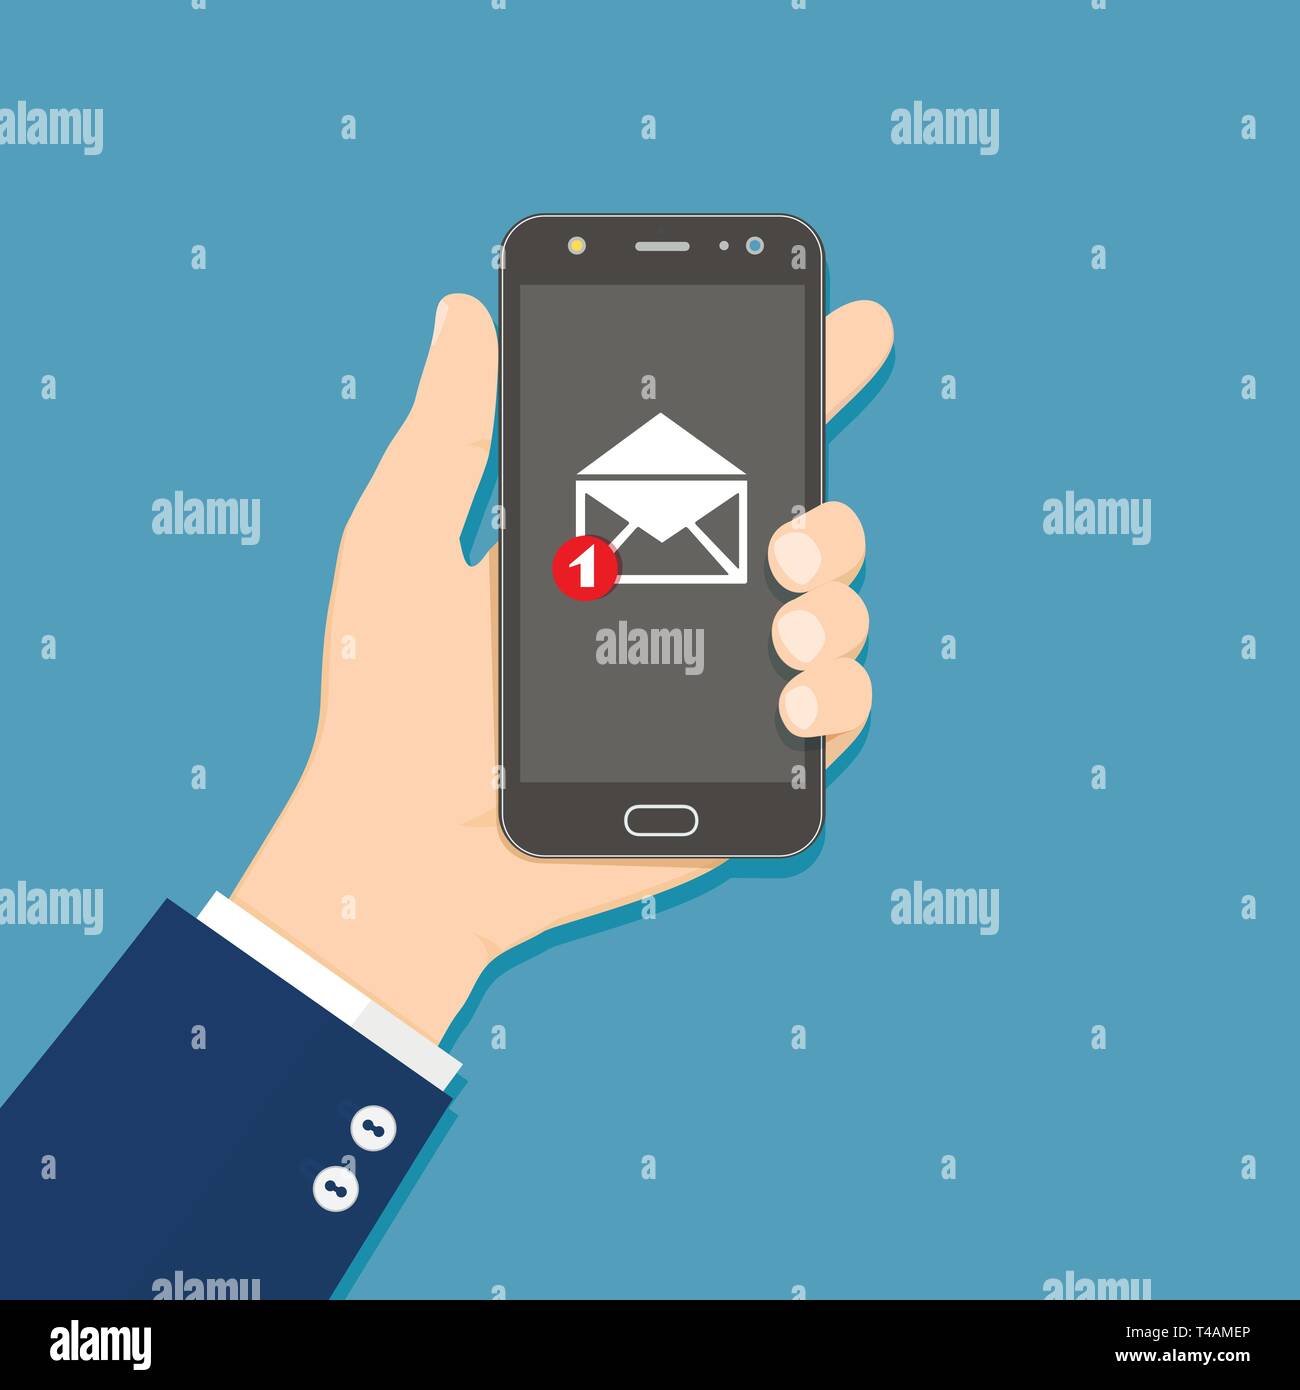 Hand holding smartphone with email icon. Flat style. Stock Vector